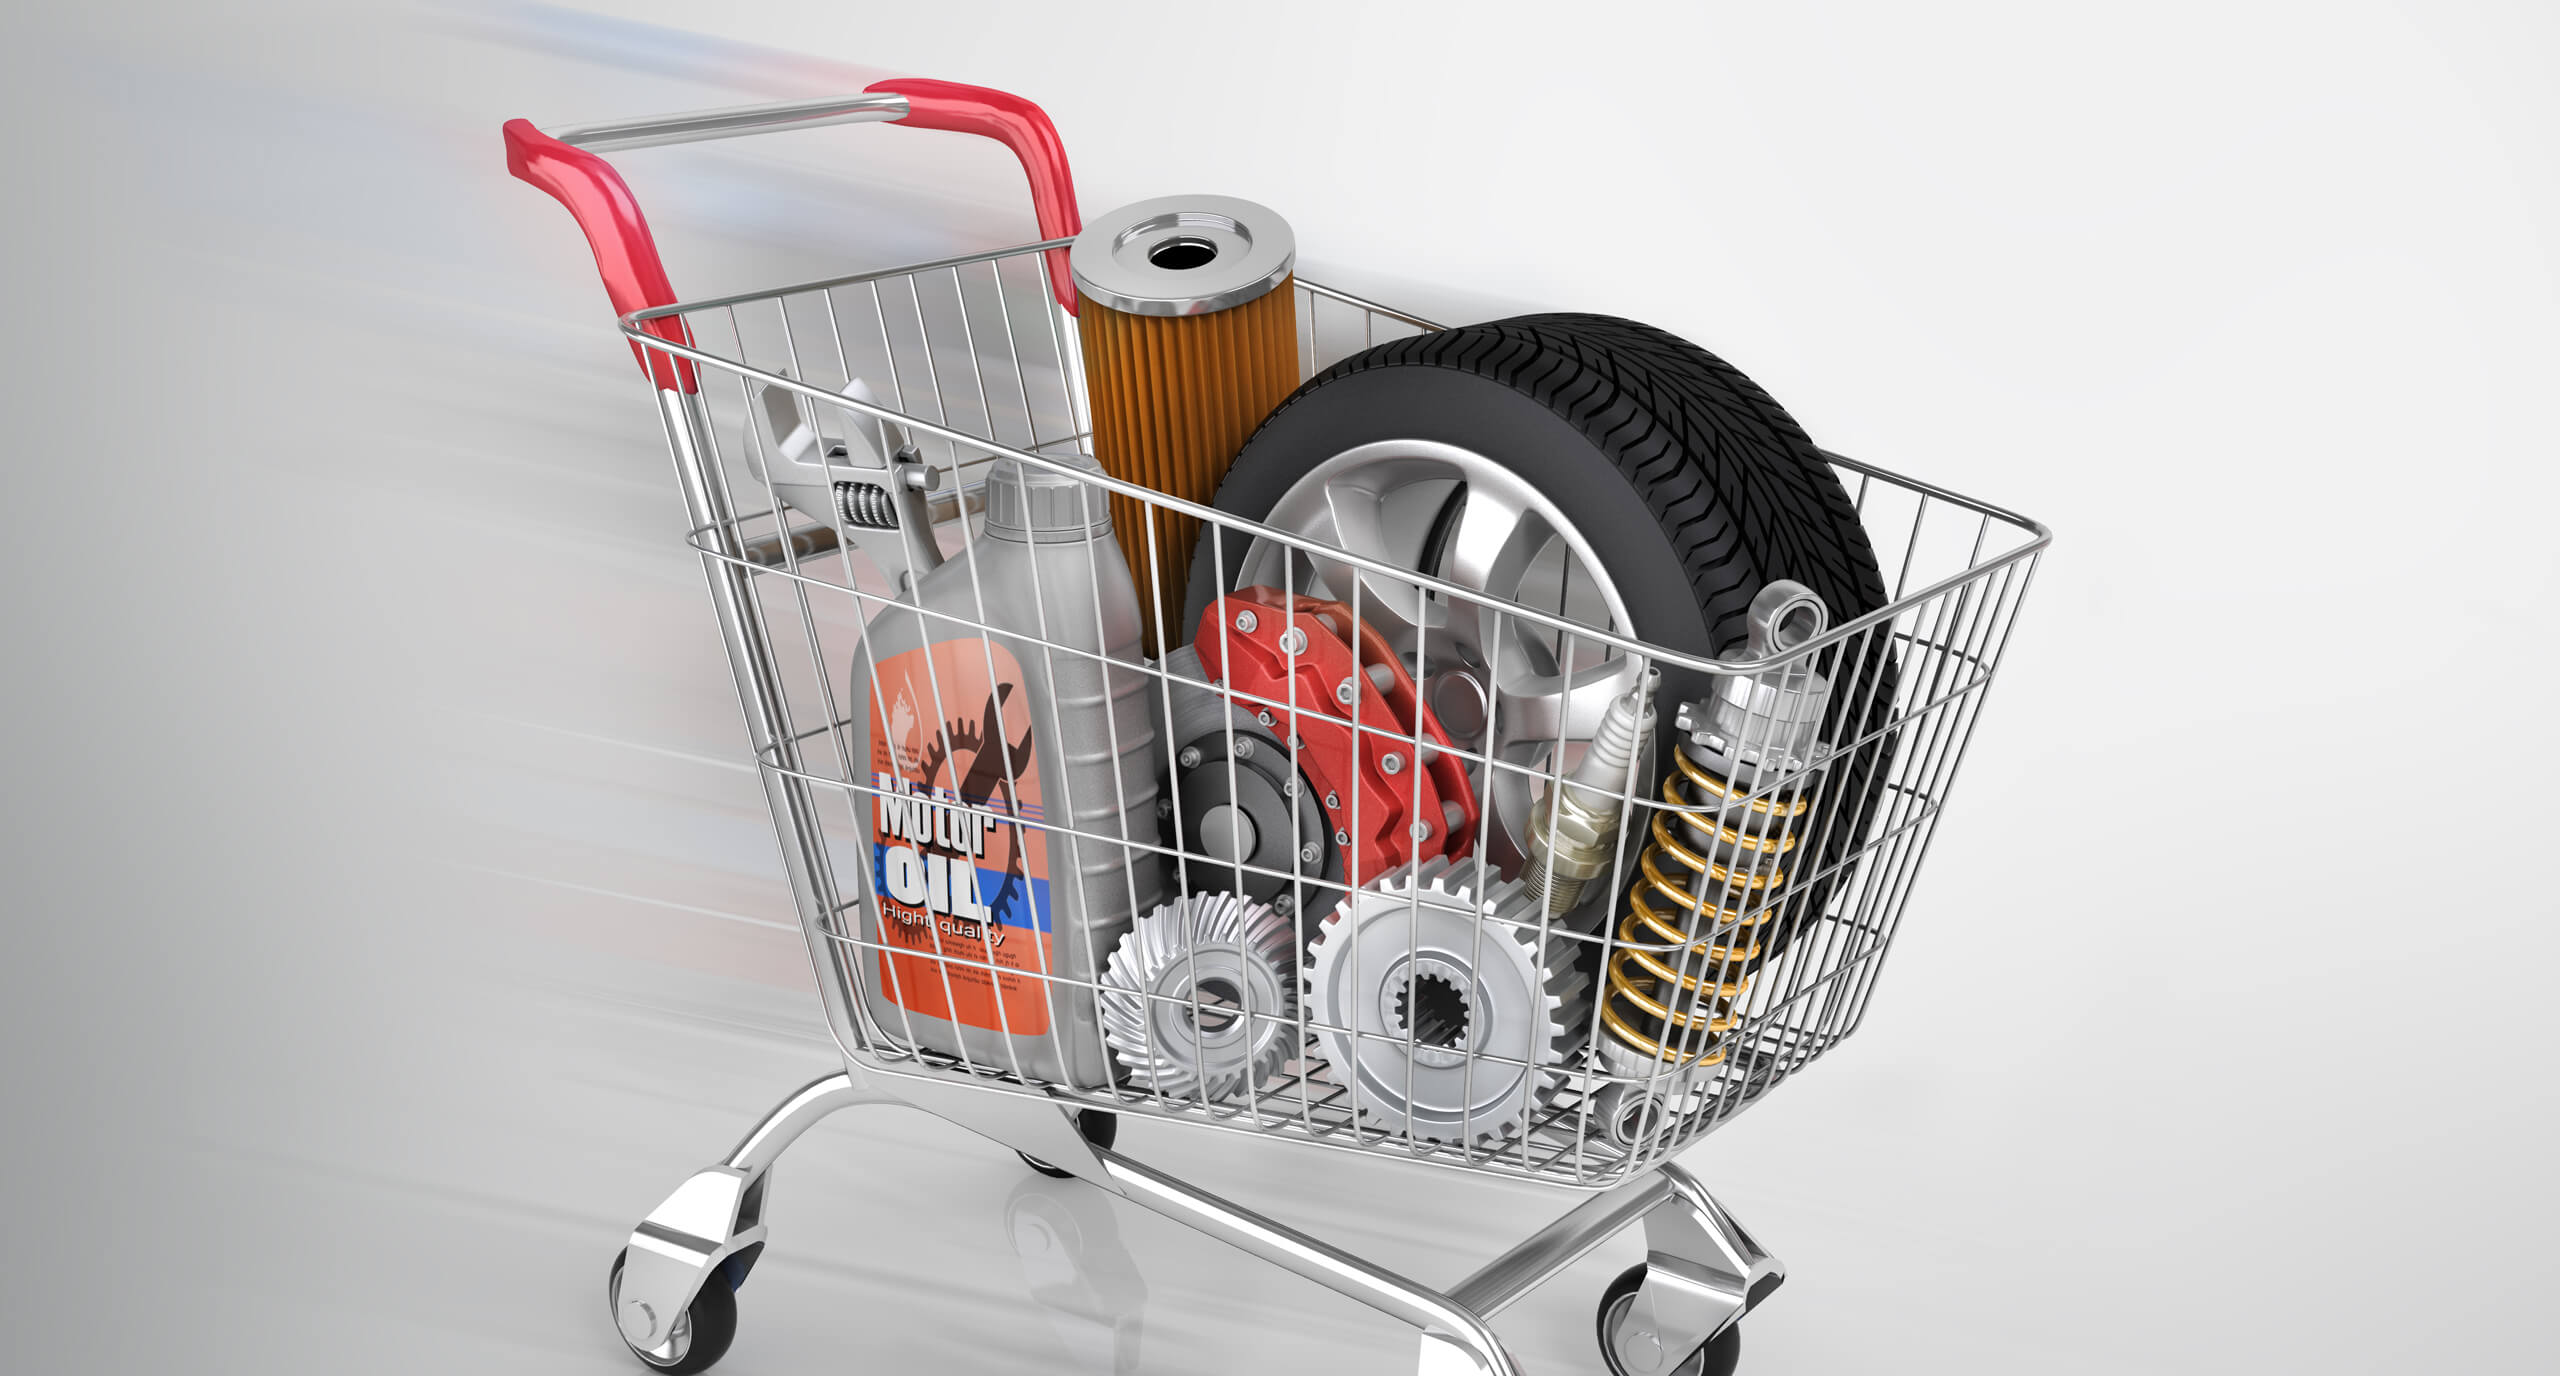 How to Choose an Auto Parts eCommerce Platform